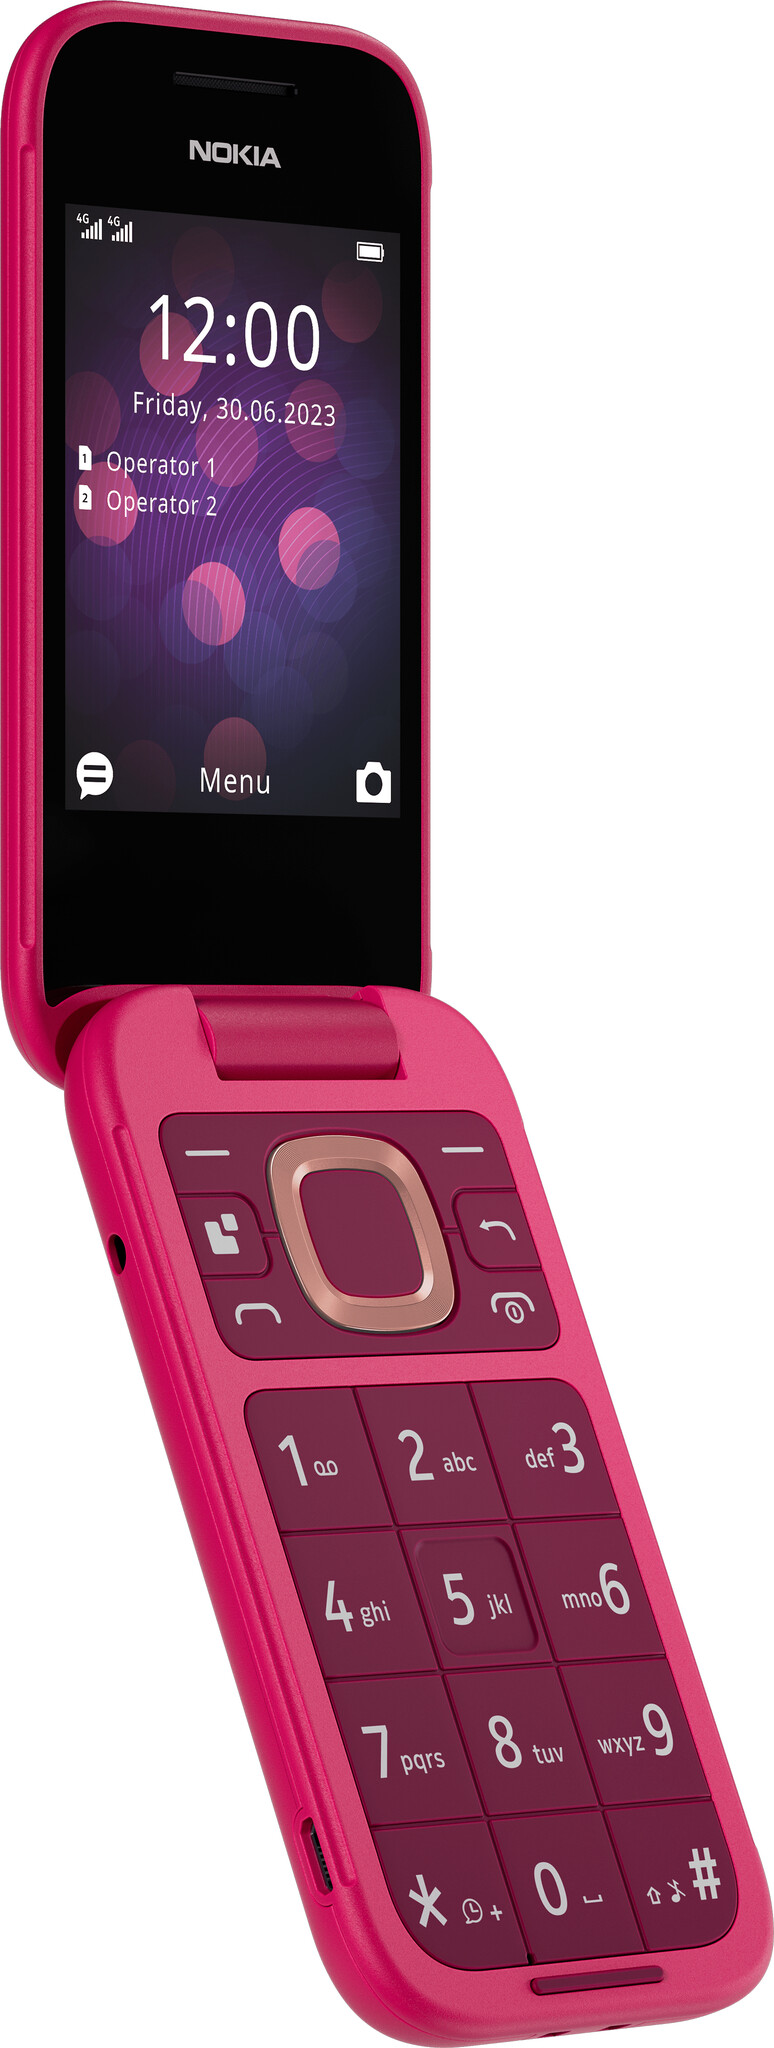 Nokia 2660 32GB Mobile Phone in Pop Pink (1GF011IPC1A04) #365025